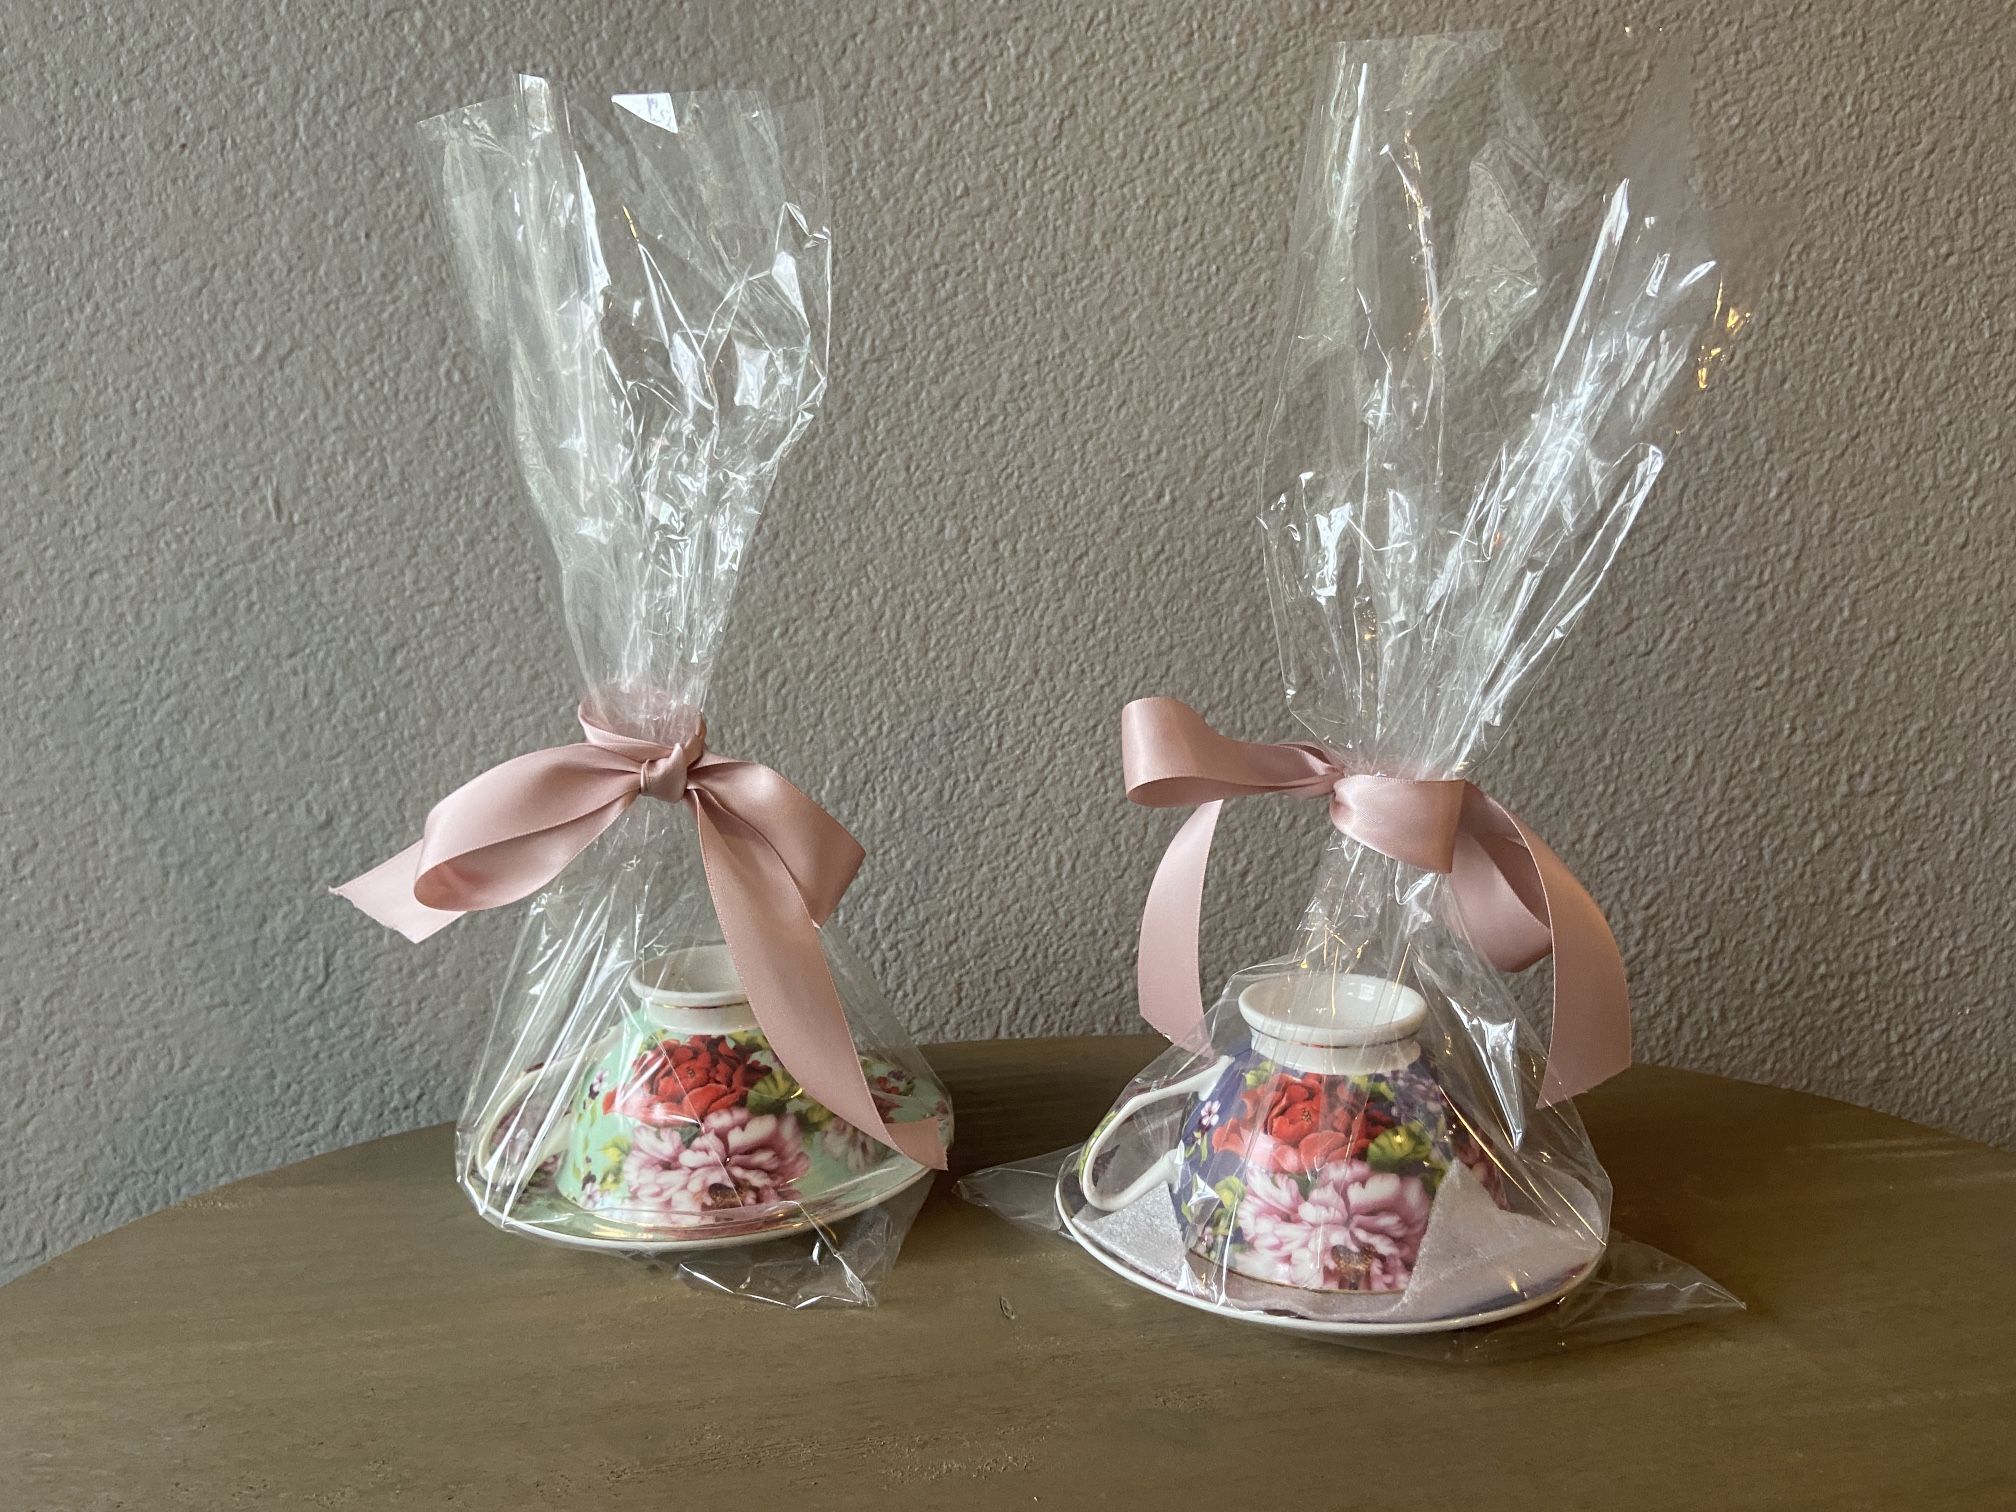 Tea Cup And Saucer Gifts